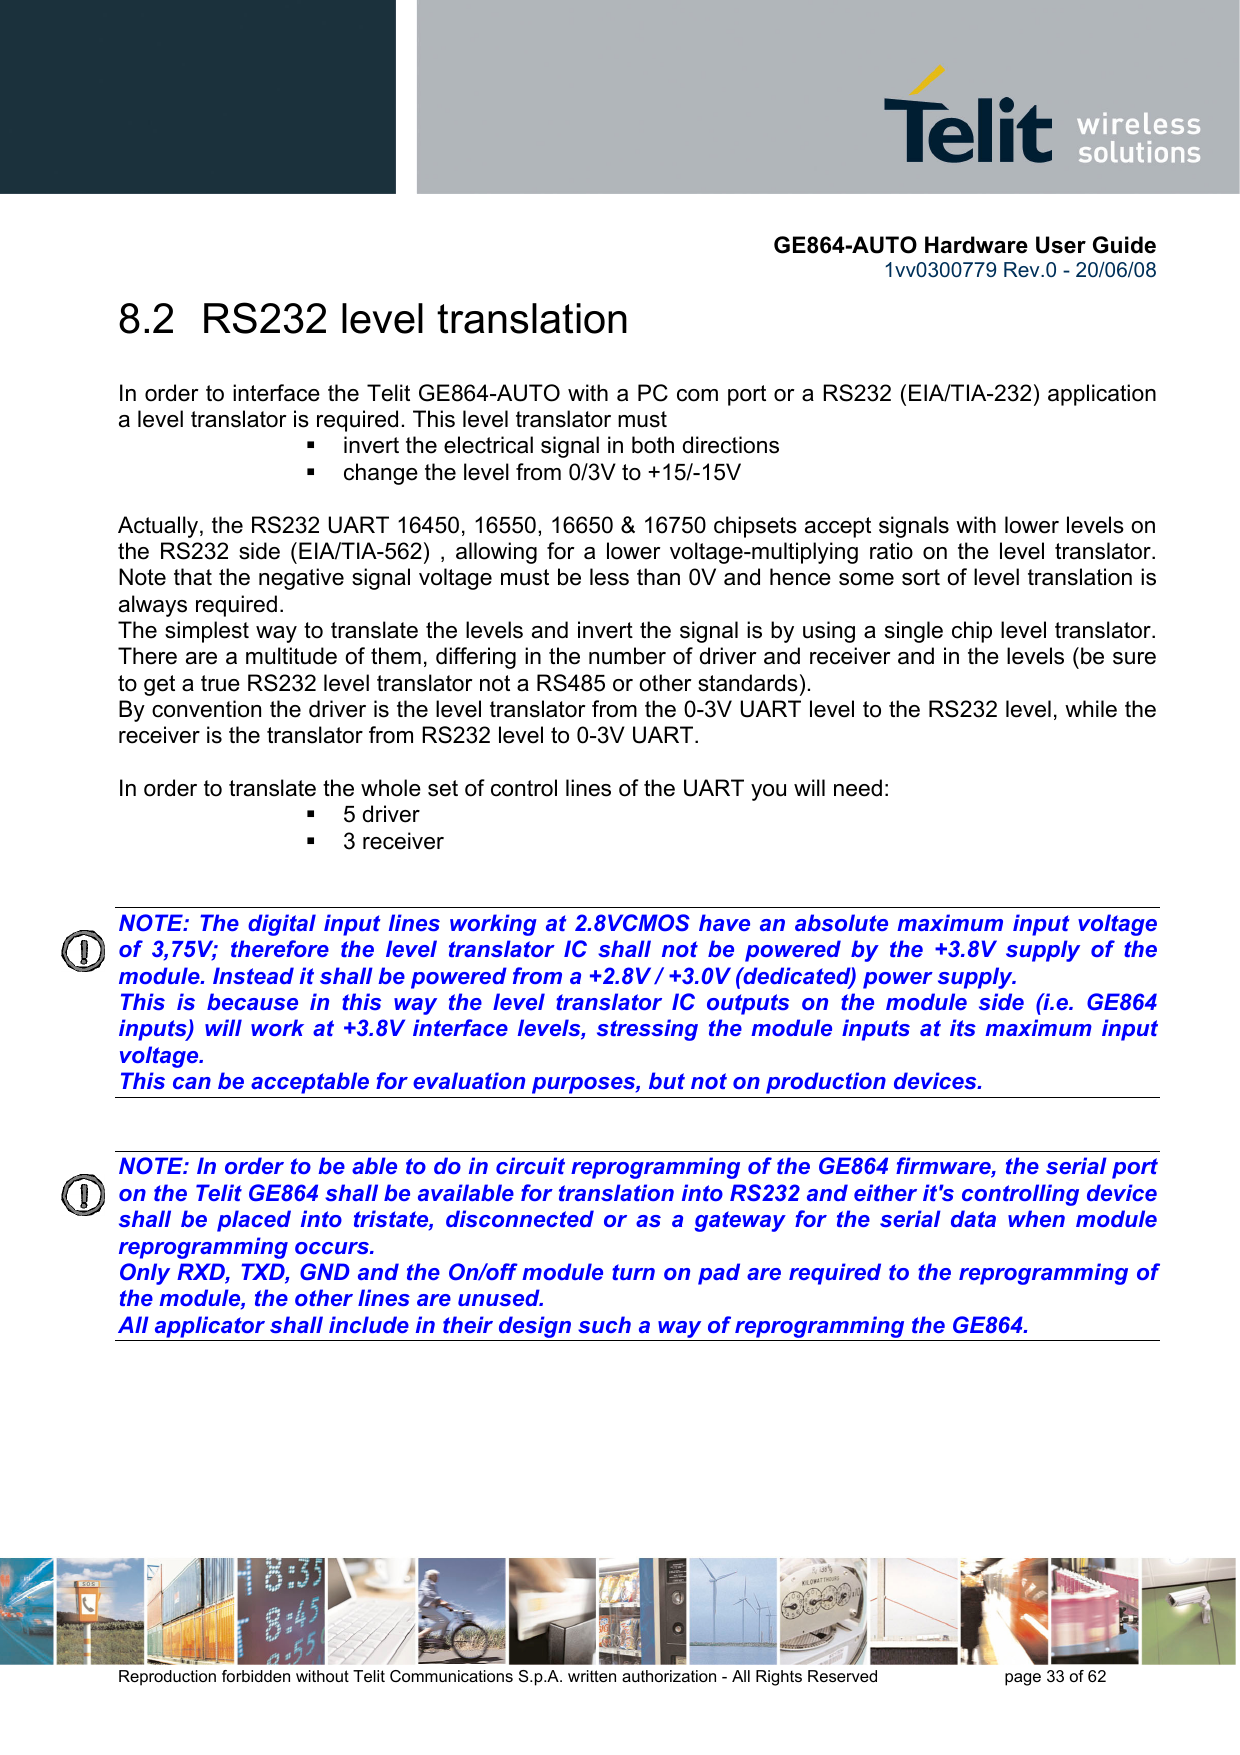       GE864-AUTO Hardware User Guide 1vv0300779 Rev.0 - 20/06/08      Reproduction forbidden without Telit Communications S.p.A. written authorization - All Rights Reserved    page 33 of 62  8.2  RS232 level translation In order to interface the Telit GE864-AUTO with a PC com port or a RS232 (EIA/TIA-232) application a level translator is required. This level translator must   invert the electrical signal in both directions   change the level from 0/3V to +15/-15V   Actually, the RS232 UART 16450, 16550, 16650 &amp; 16750 chipsets accept signals with lower levels on the RS232 side (EIA/TIA-562) , allowing for a lower voltage-multiplying ratio on the level translator. Note that the negative signal voltage must be less than 0V and hence some sort of level translation is always required.  The simplest way to translate the levels and invert the signal is by using a single chip level translator. There are a multitude of them, differing in the number of driver and receiver and in the levels (be sure to get a true RS232 level translator not a RS485 or other standards). By convention the driver is the level translator from the 0-3V UART level to the RS232 level, while the receiver is the translator from RS232 level to 0-3V UART.  In order to translate the whole set of control lines of the UART you will need:  5 driver  3 receiver   NOTE: The digital input lines working at 2.8VCMOS have an absolute maximum input voltage of 3,75V; therefore the level translator IC shall not be powered by the +3.8V supply of the module. Instead it shall be powered from a +2.8V / +3.0V (dedicated) power supply. This is because in this way the level translator IC outputs on the module side (i.e. GE864 inputs) will work at +3.8V interface levels, stressing the module inputs at its maximum input voltage. This can be acceptable for evaluation purposes, but not on production devices.   NOTE: In order to be able to do in circuit reprogramming of the GE864 firmware, the serial port on the Telit GE864 shall be available for translation into RS232 and either it&apos;s controlling device shall be placed into tristate, disconnected or as a gateway for the serial data when module reprogramming occurs. Only RXD, TXD, GND and the On/off module turn on pad are required to the reprogramming of the module, the other lines are unused. All applicator shall include in their design such a way of reprogramming the GE864.    